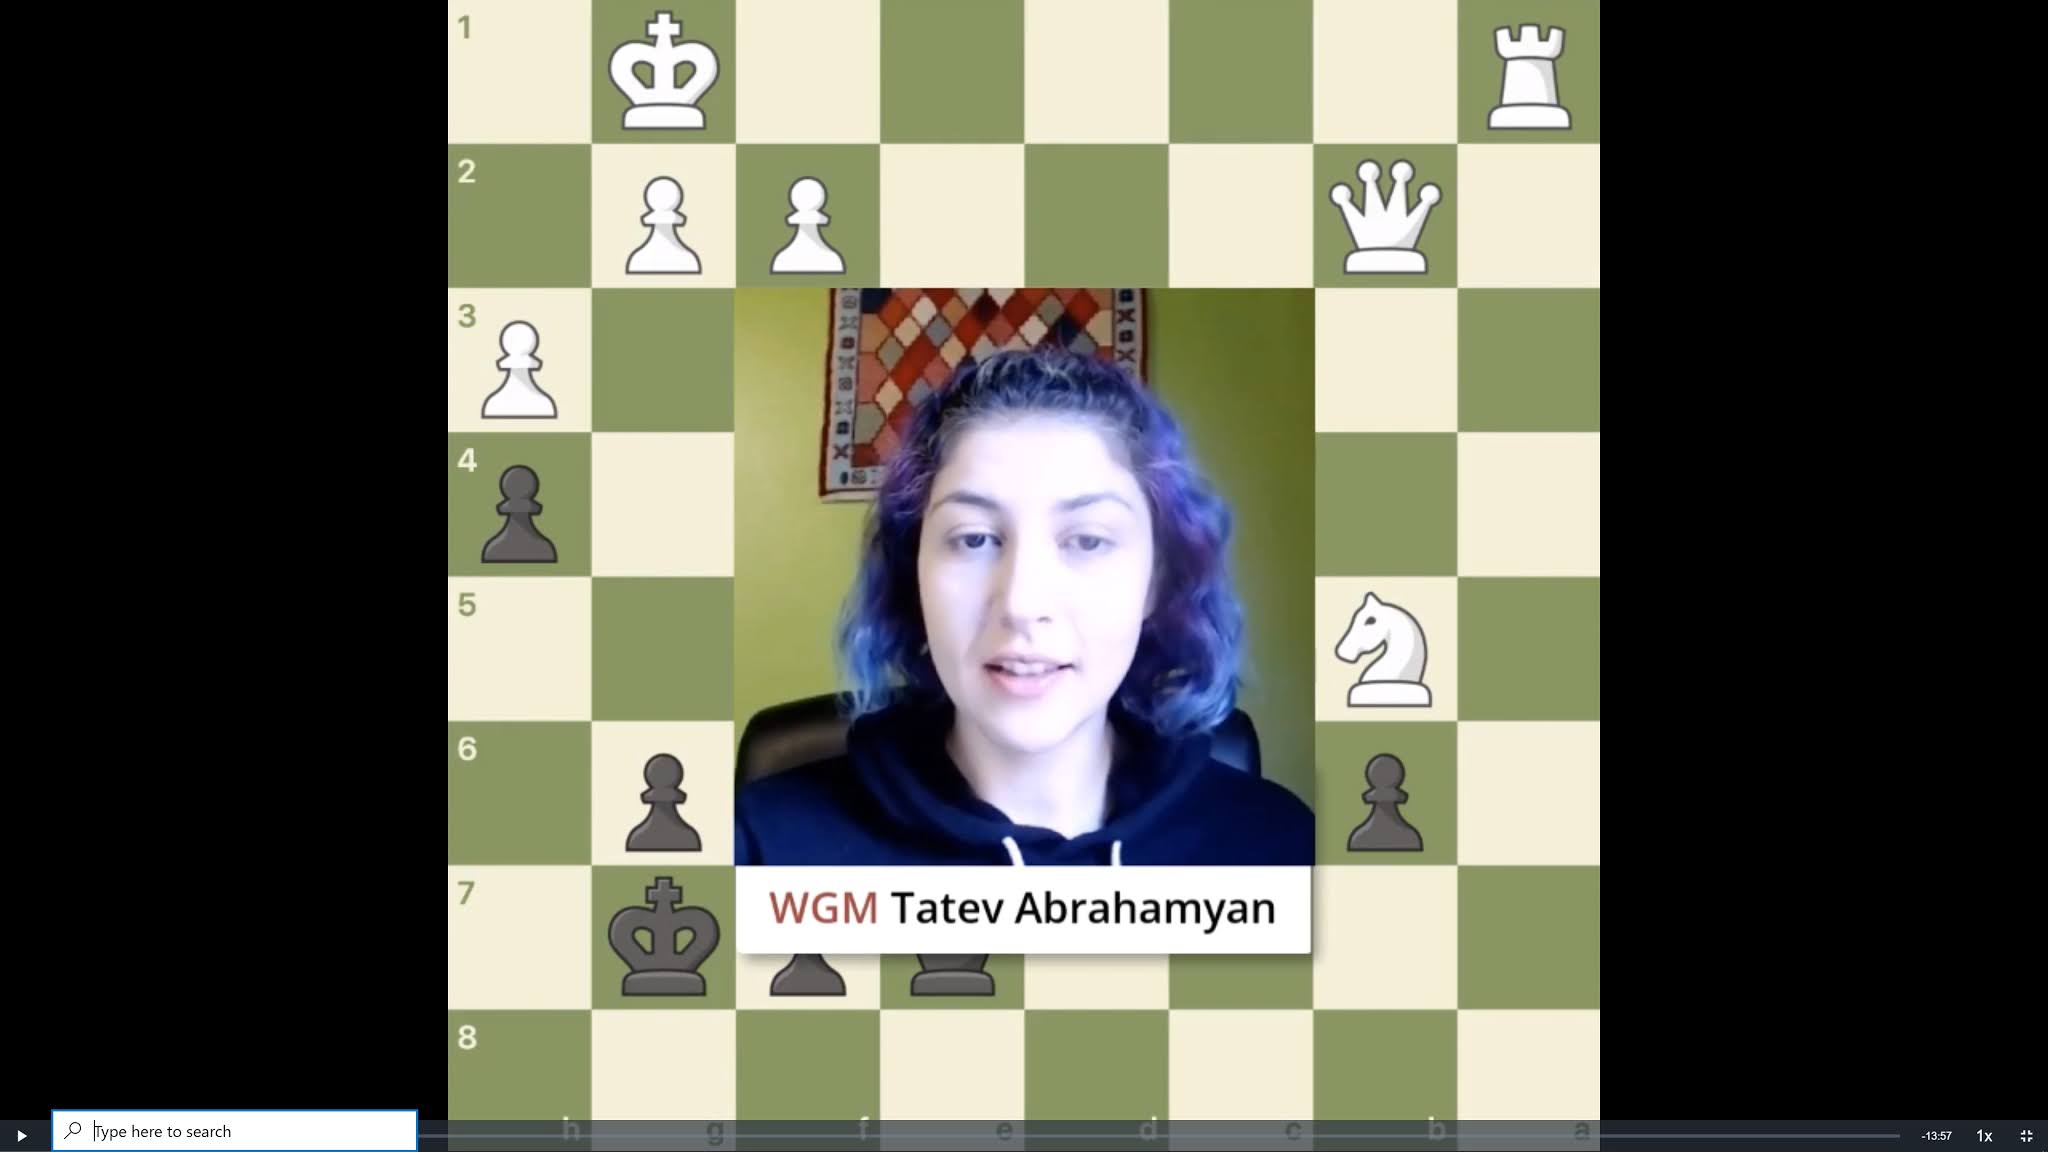 The simplified Caro-Kann is virtually unstoppable • Free Chess Videos •